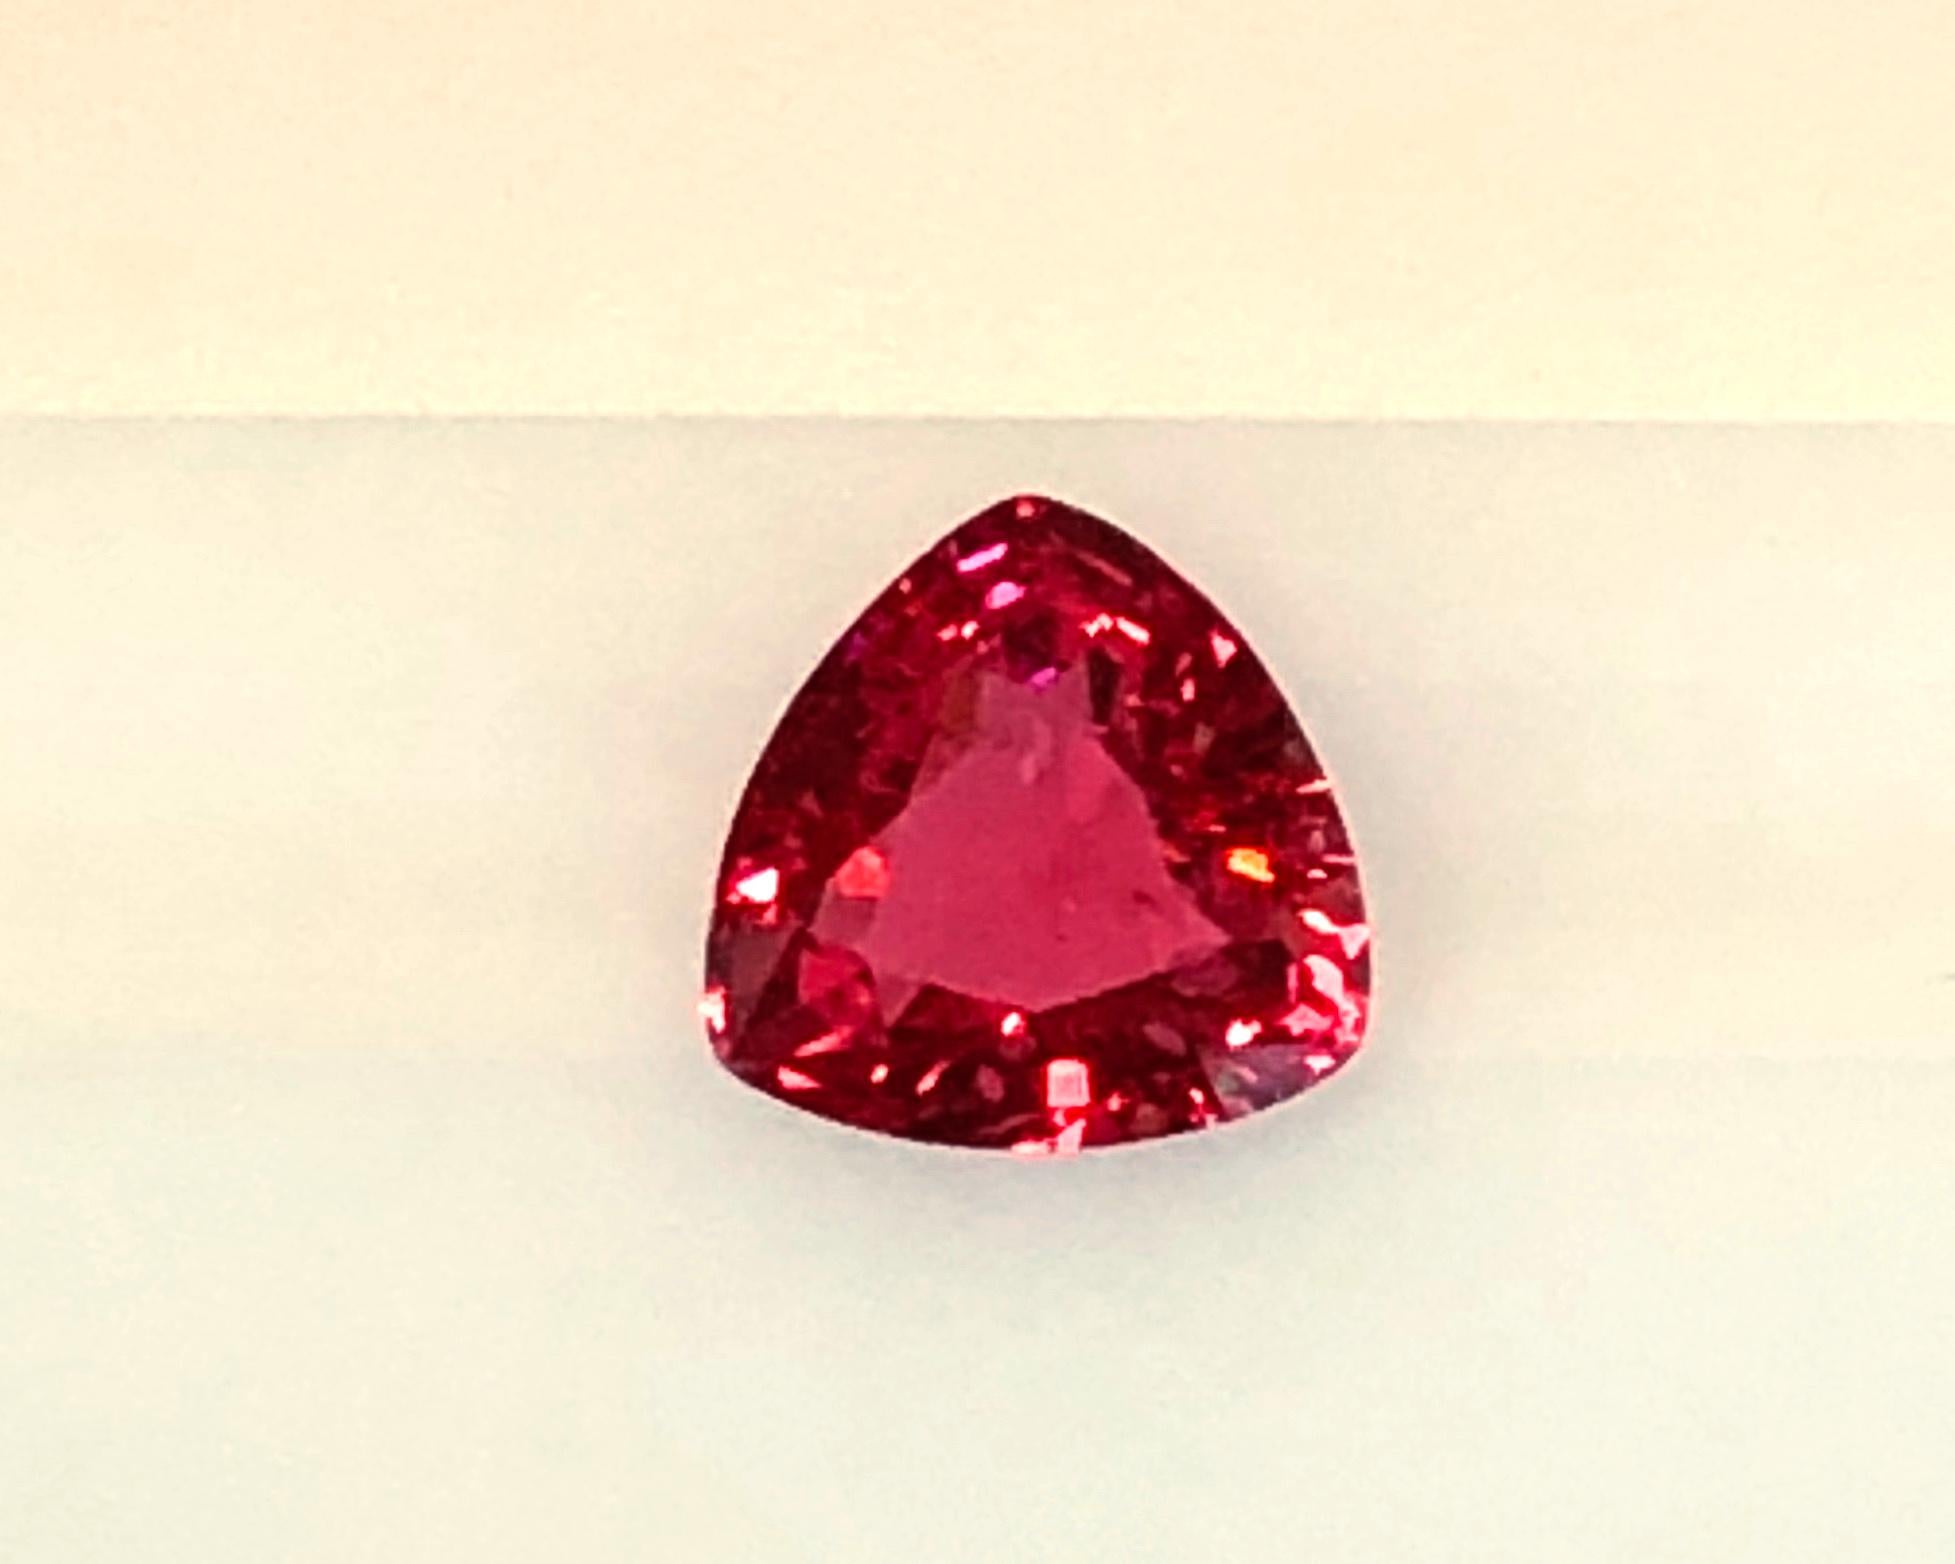 Privately Curated Collection of Unset Loose Fancy Spinel Gemstones, 89.77 Carats 4